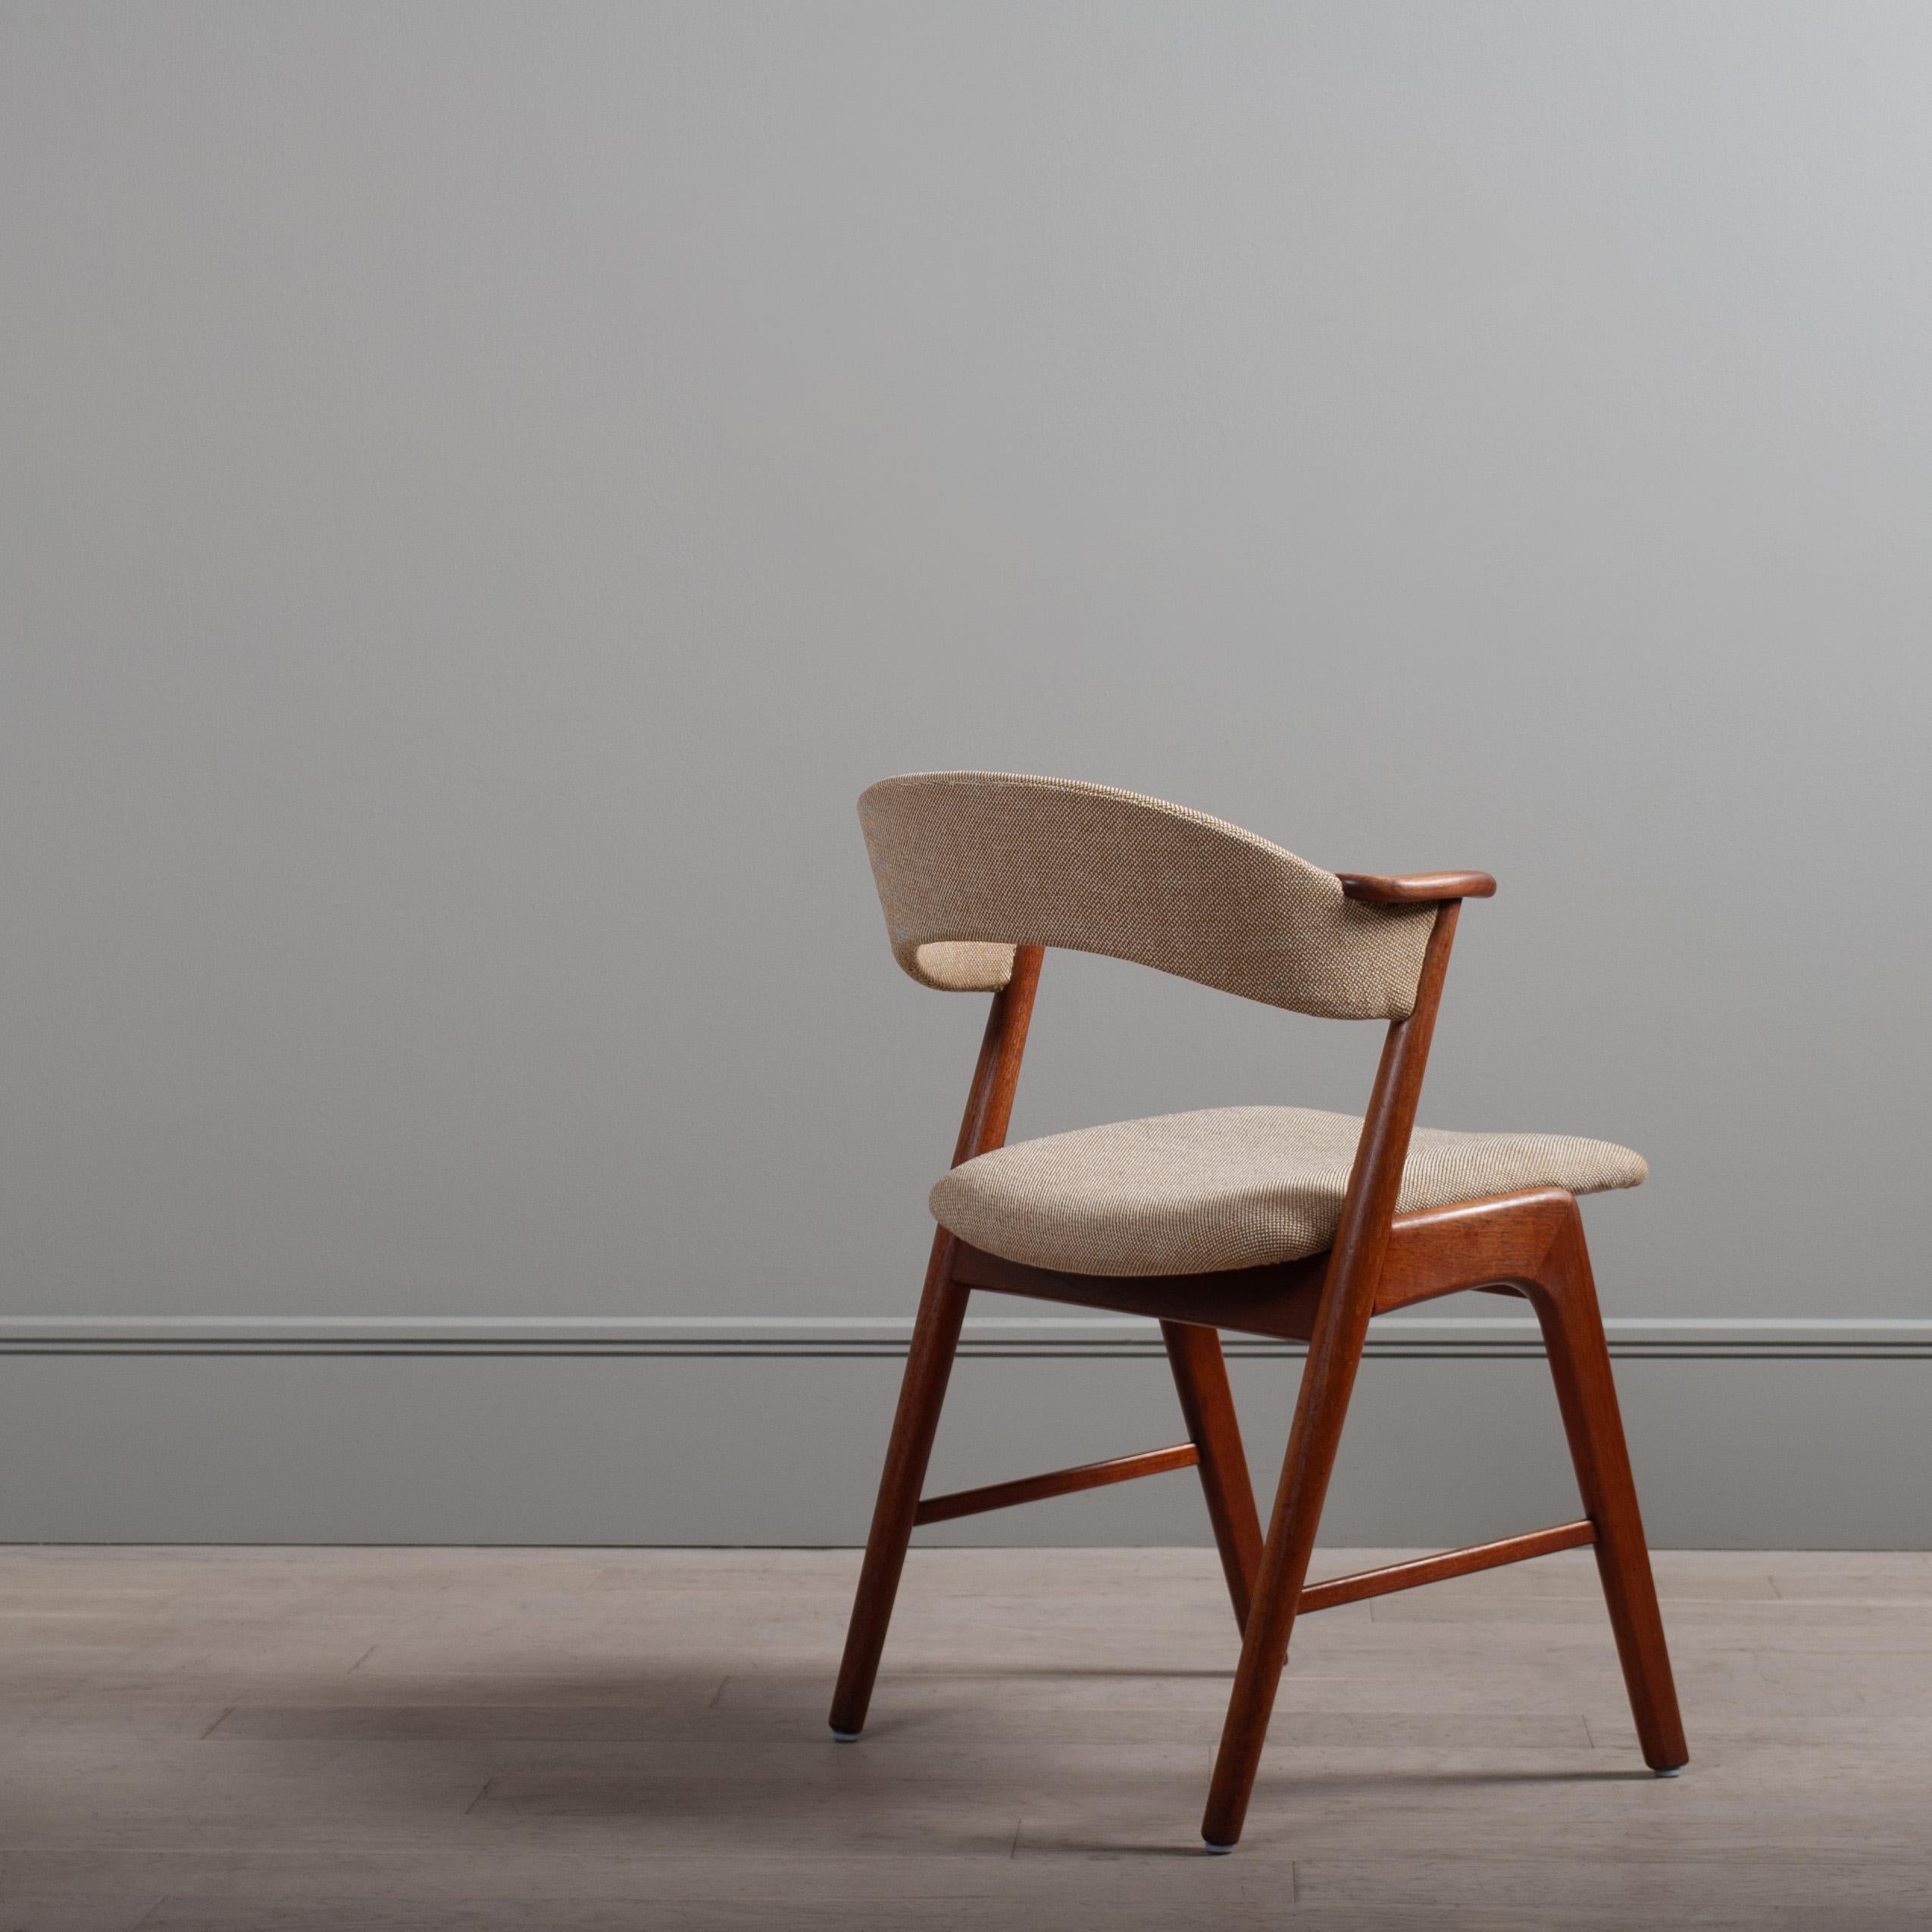 Korup Stolefabrik Modernist Dining Chairs, Set of 4 In Good Condition For Sale In London, GB